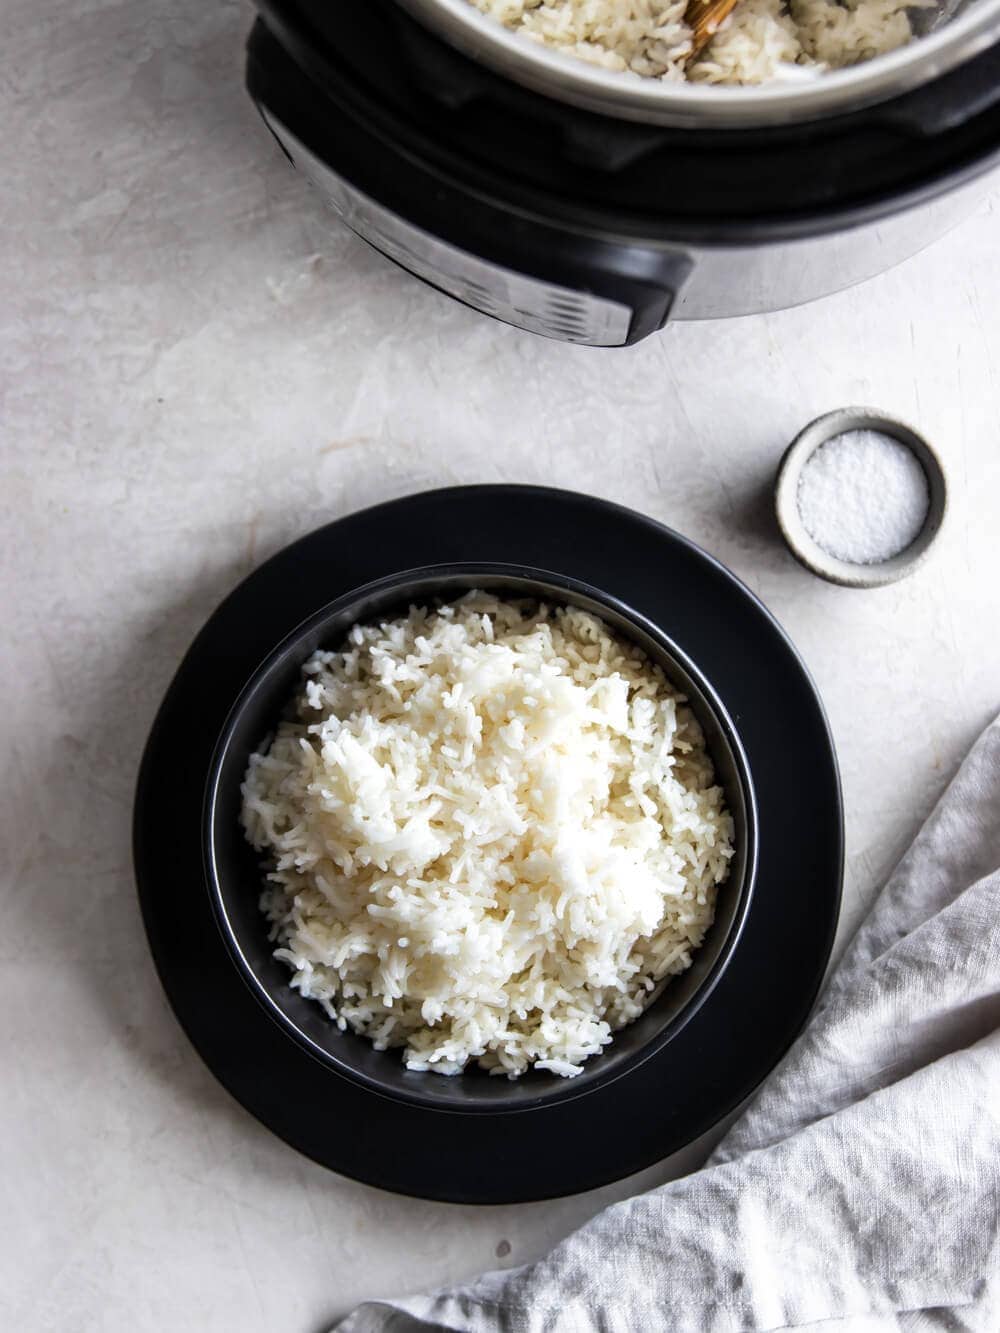 A bowl of rice sitting next to the Instant Pot and a small bowl of salt.